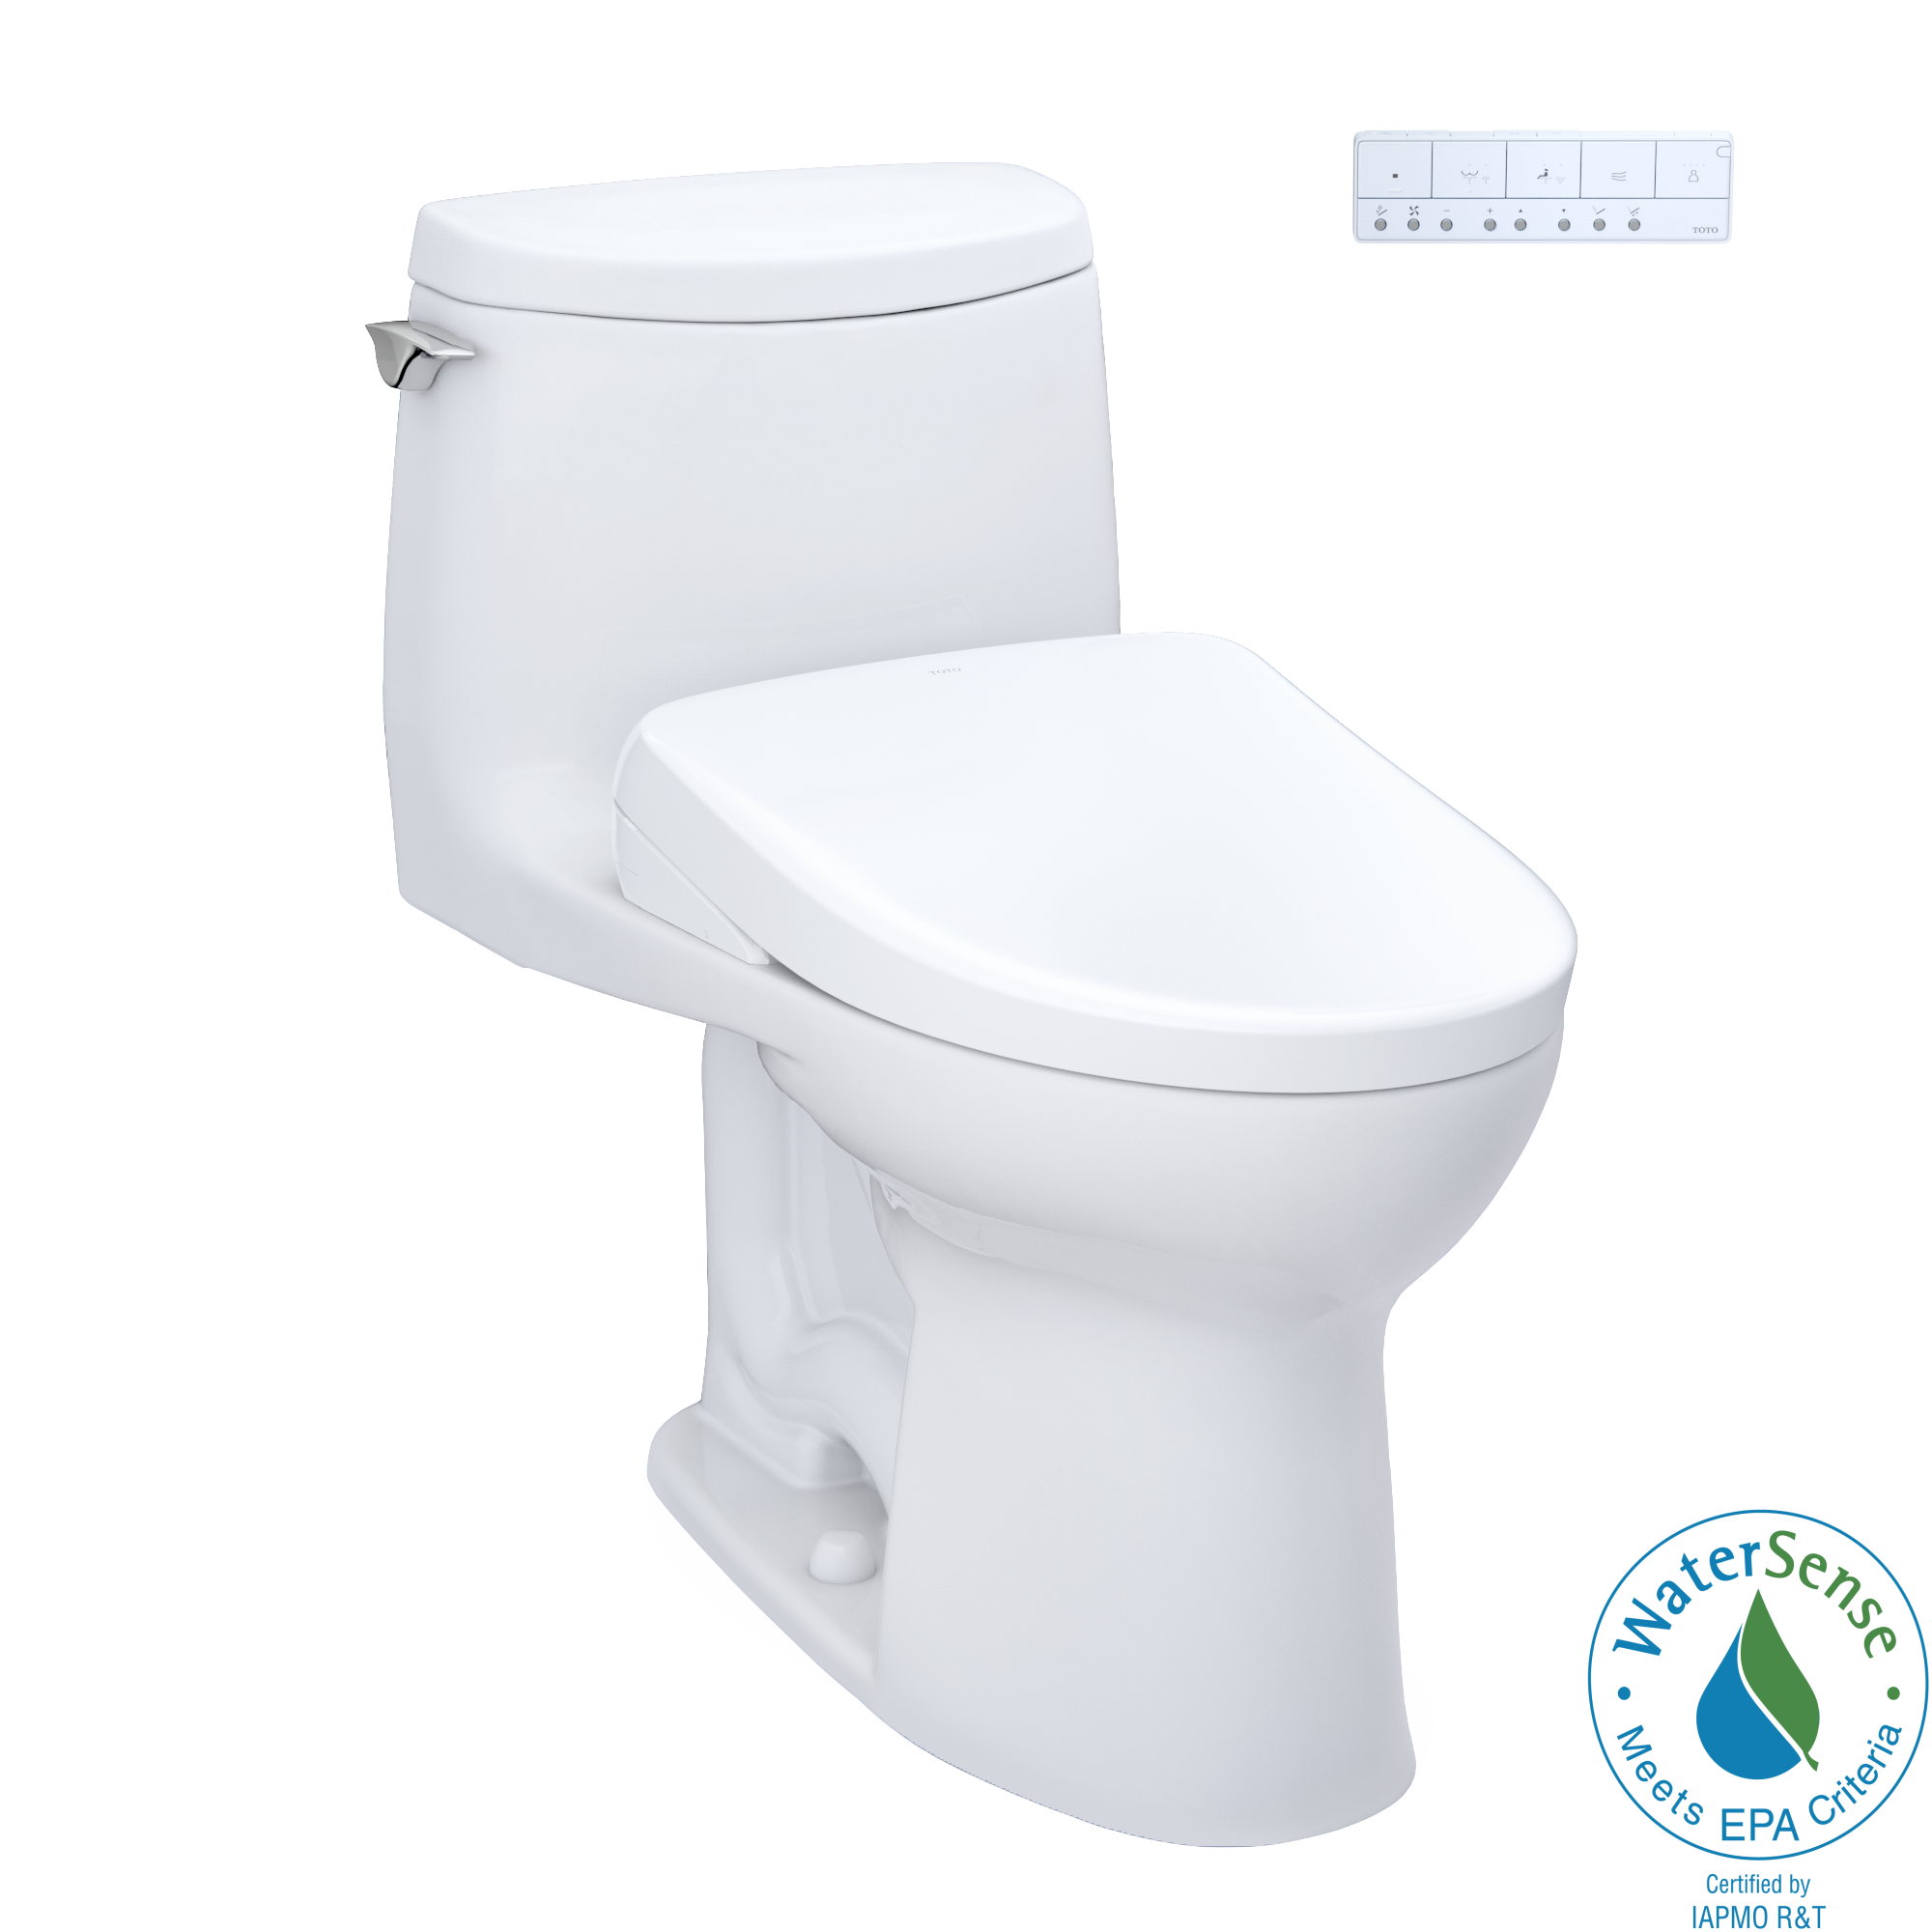 TOTO WASHLET+ UltraMax II 1G One-Piece Elongated 1.0 GPF Toilet and WASHLET+ S7A Contemporary Bidet Seat, Cotton White - MW6044736CUFG#01, MW6044736CUFGA#01